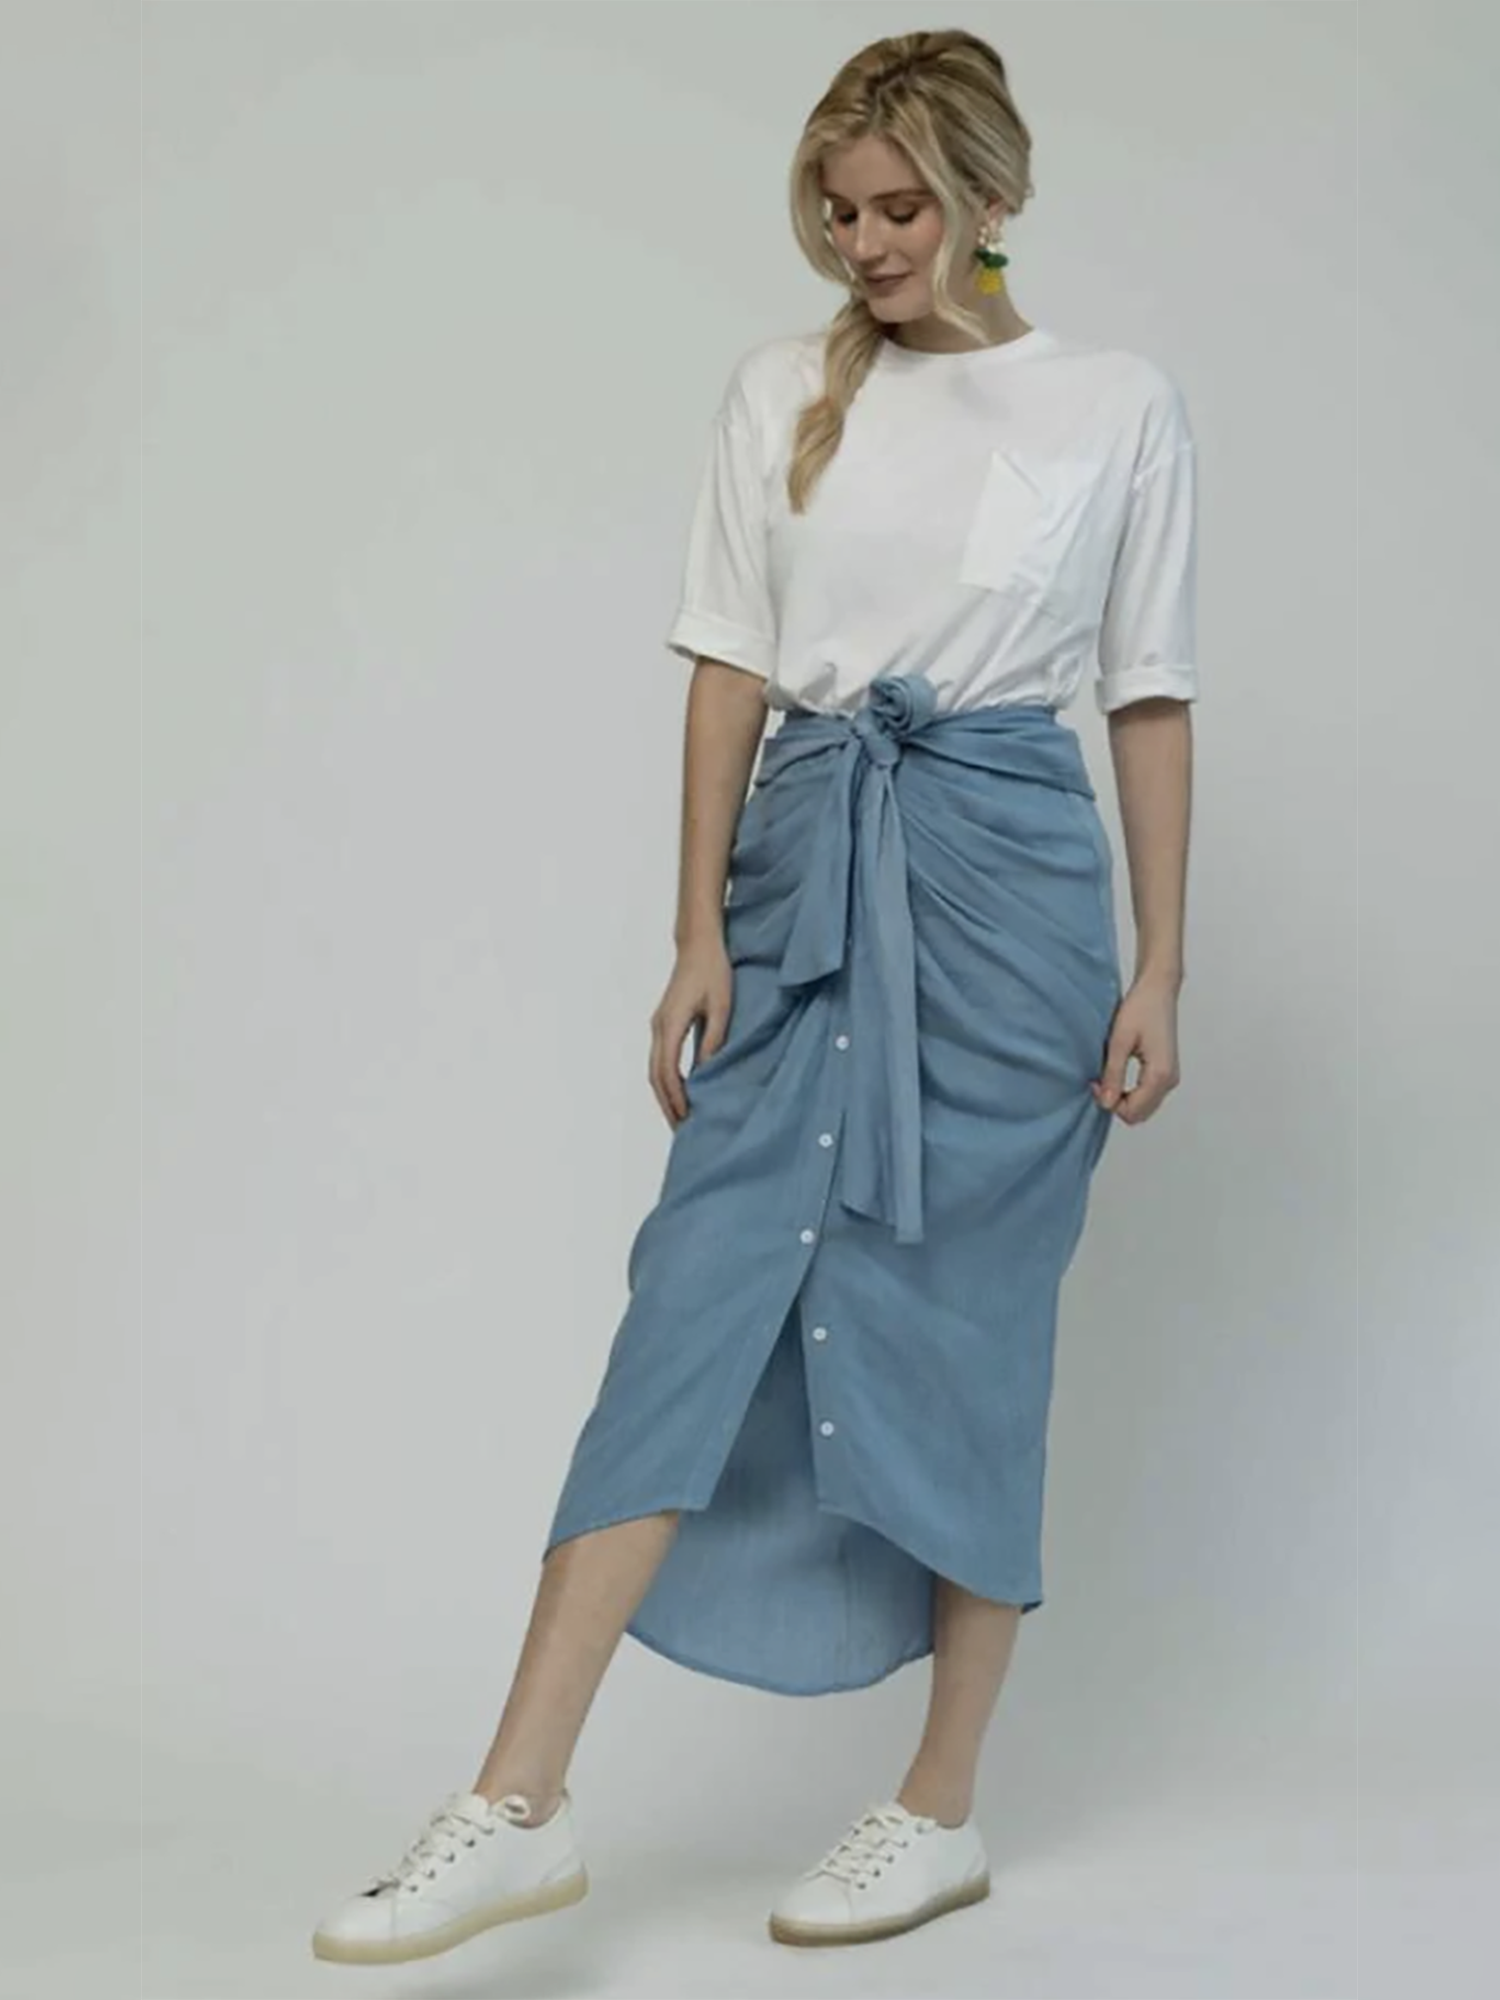 Third By Cee Denim Draped Belted Skirt Third by Cee